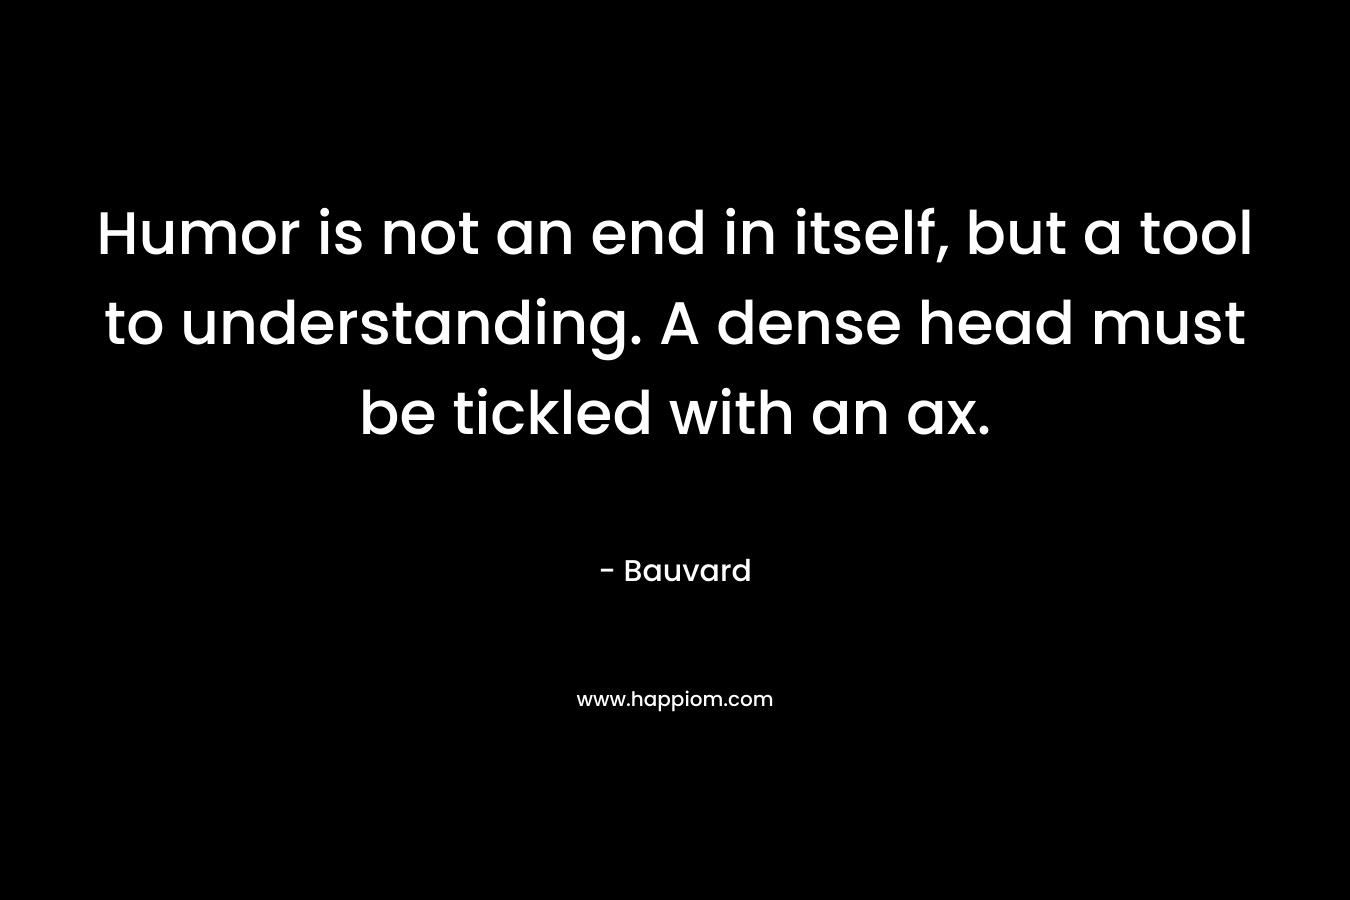 Humor is not an end in itself, but a tool to understanding. A dense head must be tickled with an ax.